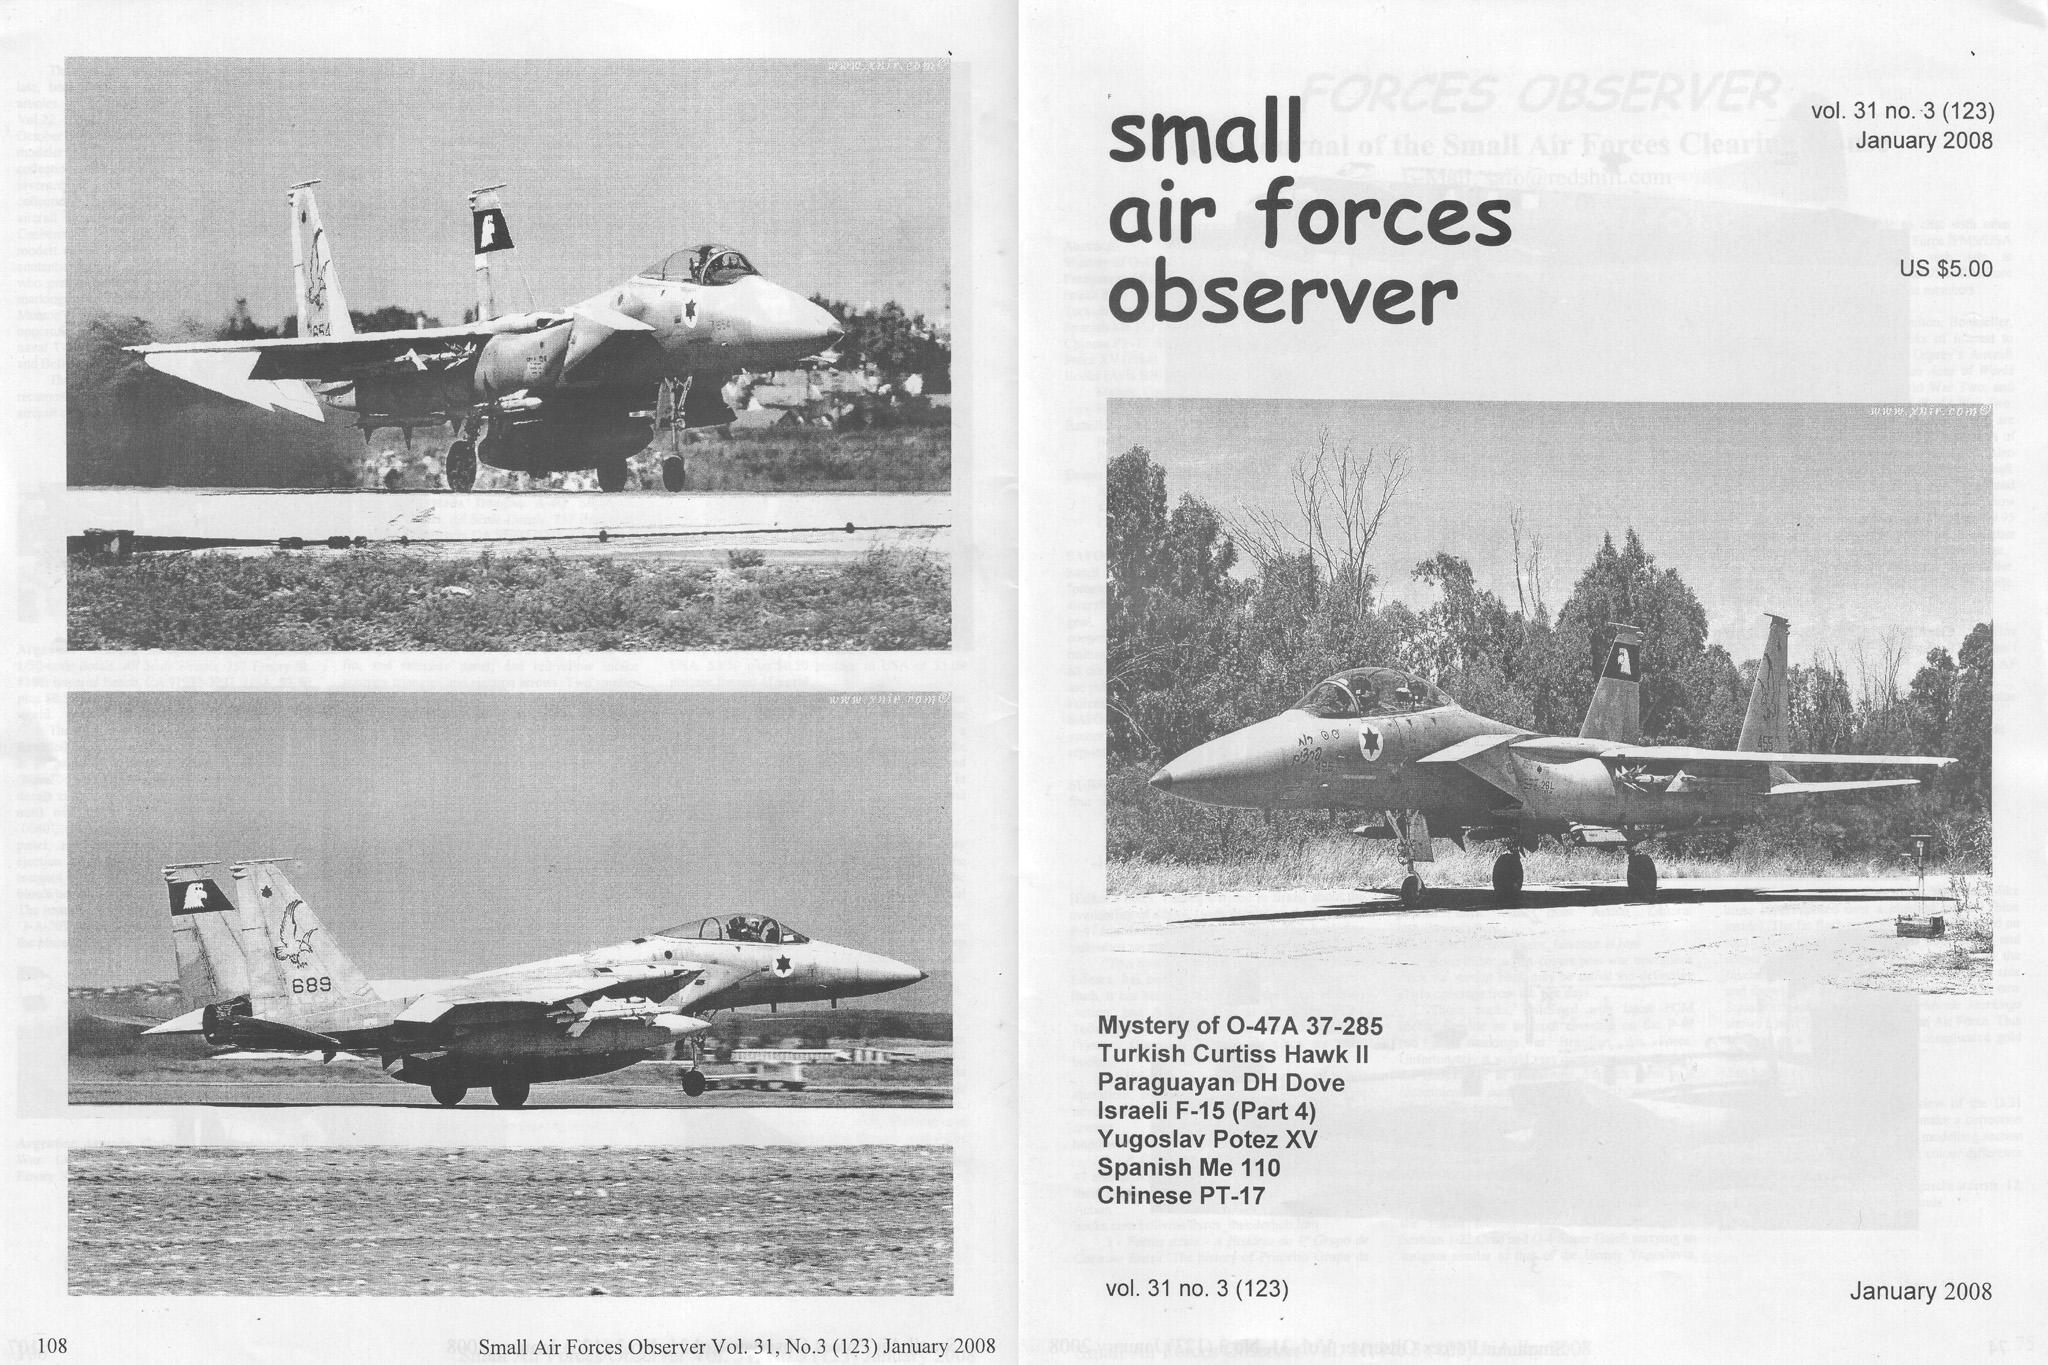 2008 Small Air Forces Observer magazine